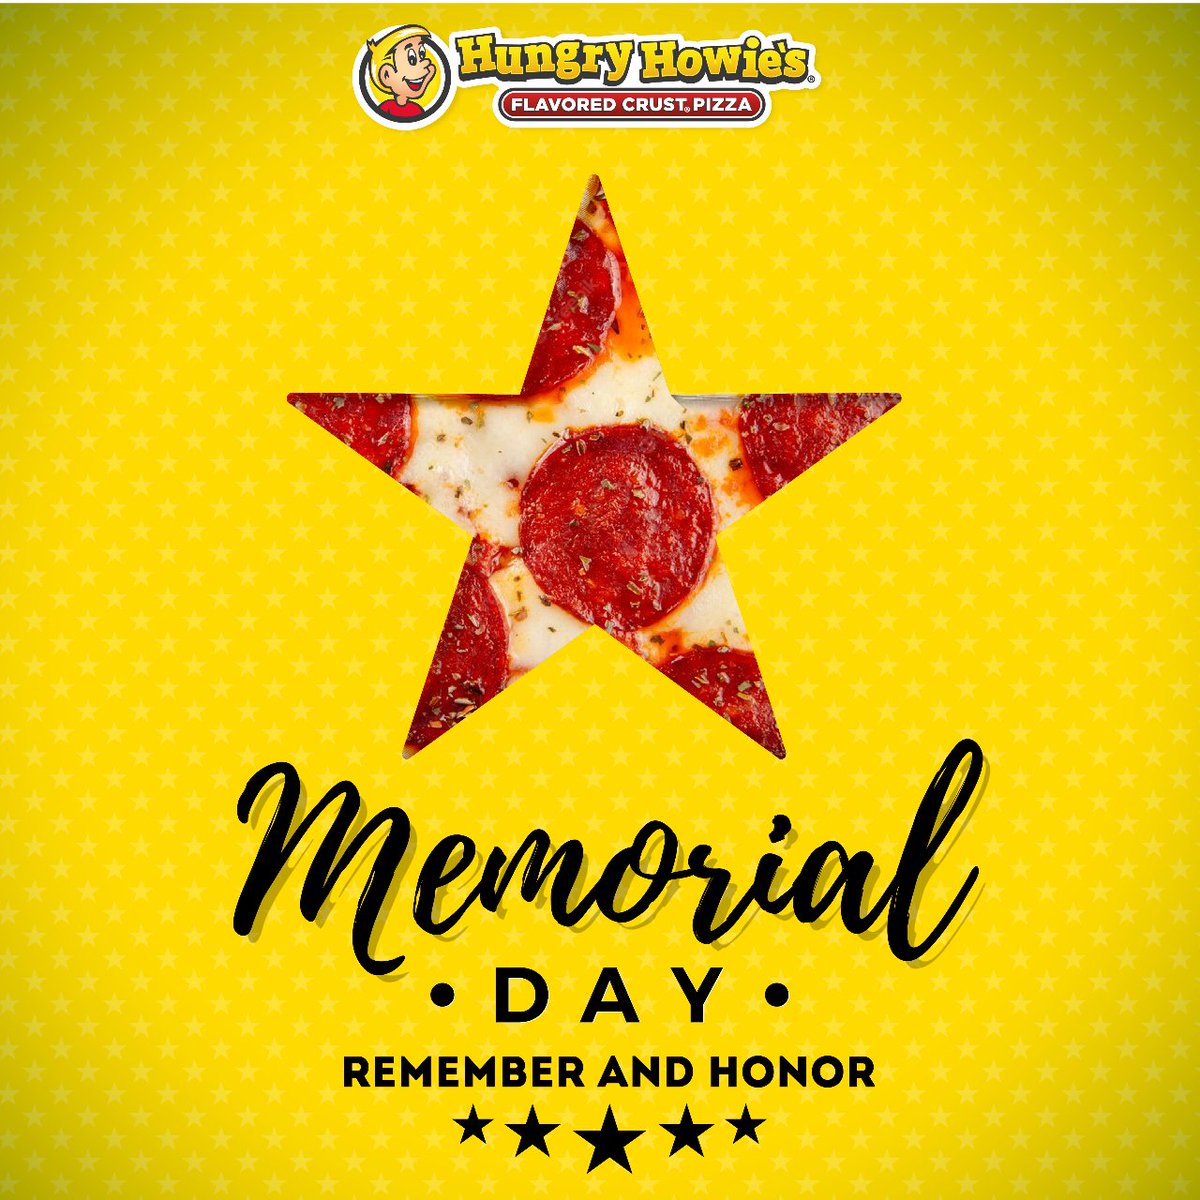 As we gather with family and friends on this Memorial Day, let's celebrate the spirit of unity and gratitude. Raise a slice of pizza in honor of those who served our country. 🍕🙌 #MemorialDayCelebration #PizzaGathering #GratefulNation #HungryHowies